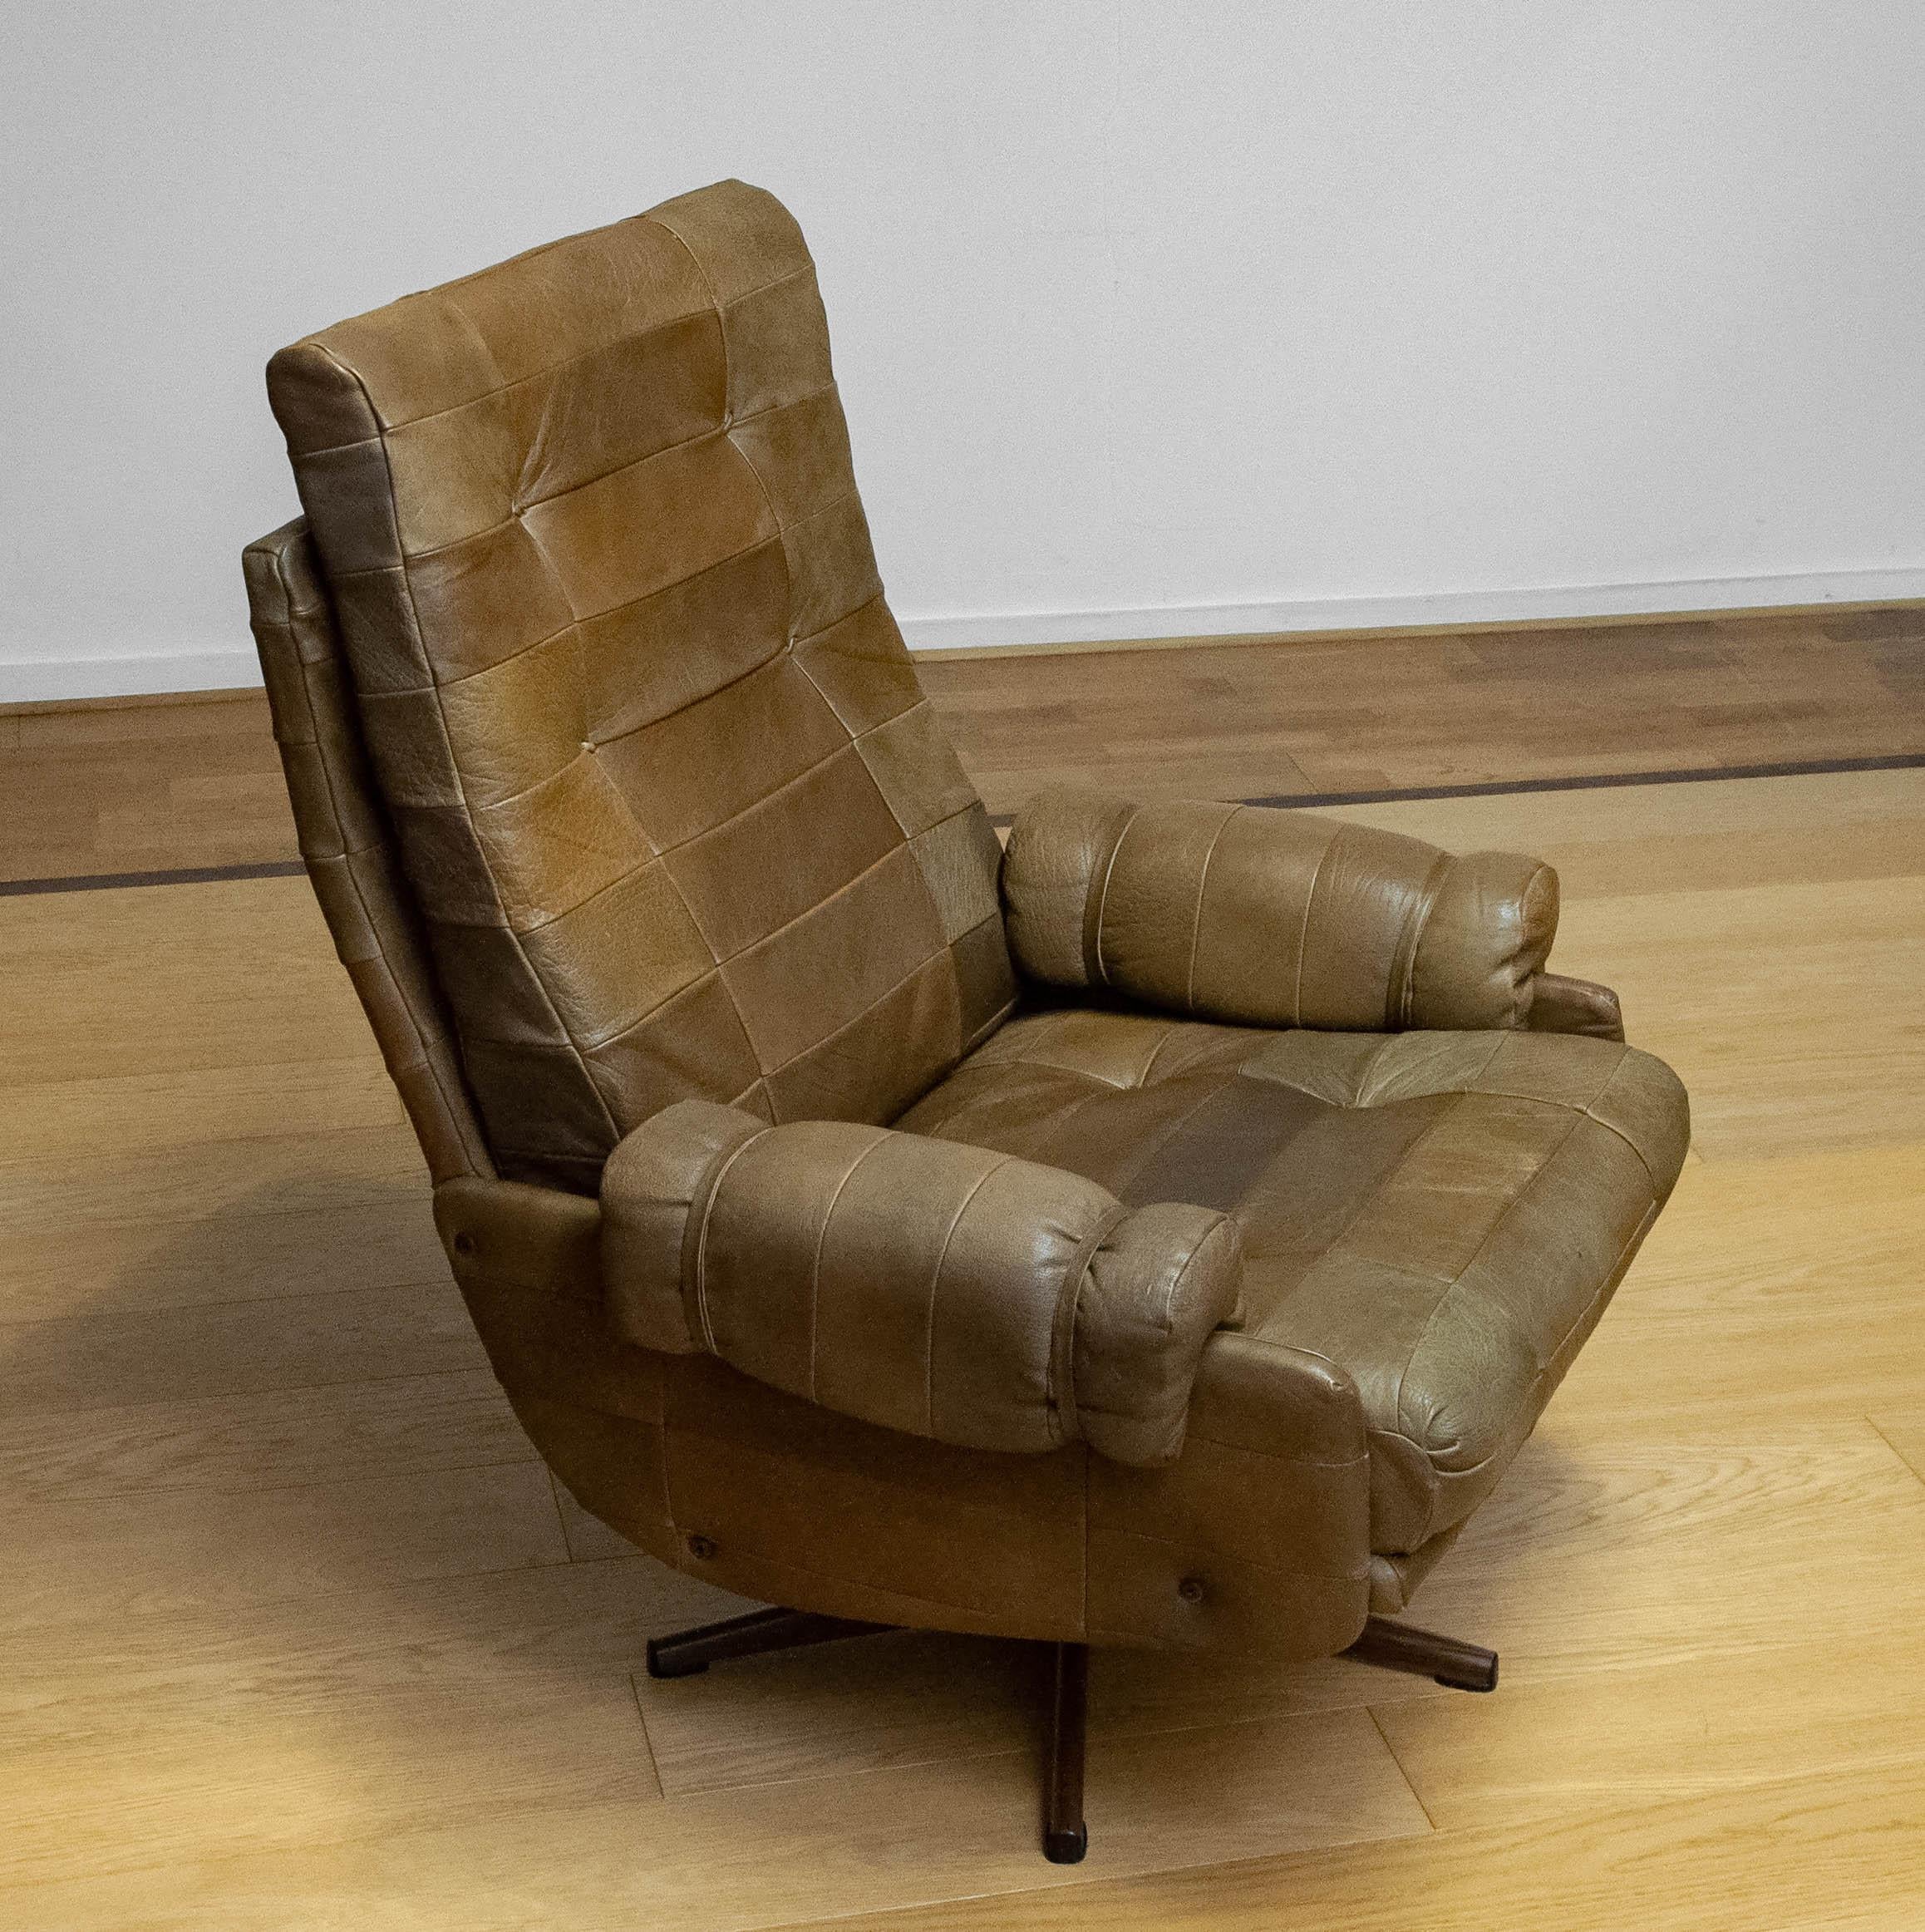 70s Swivel Chair By Arne Norell Möbel AB In Sturdy Olive Green Patchwork Leather For Sale 1